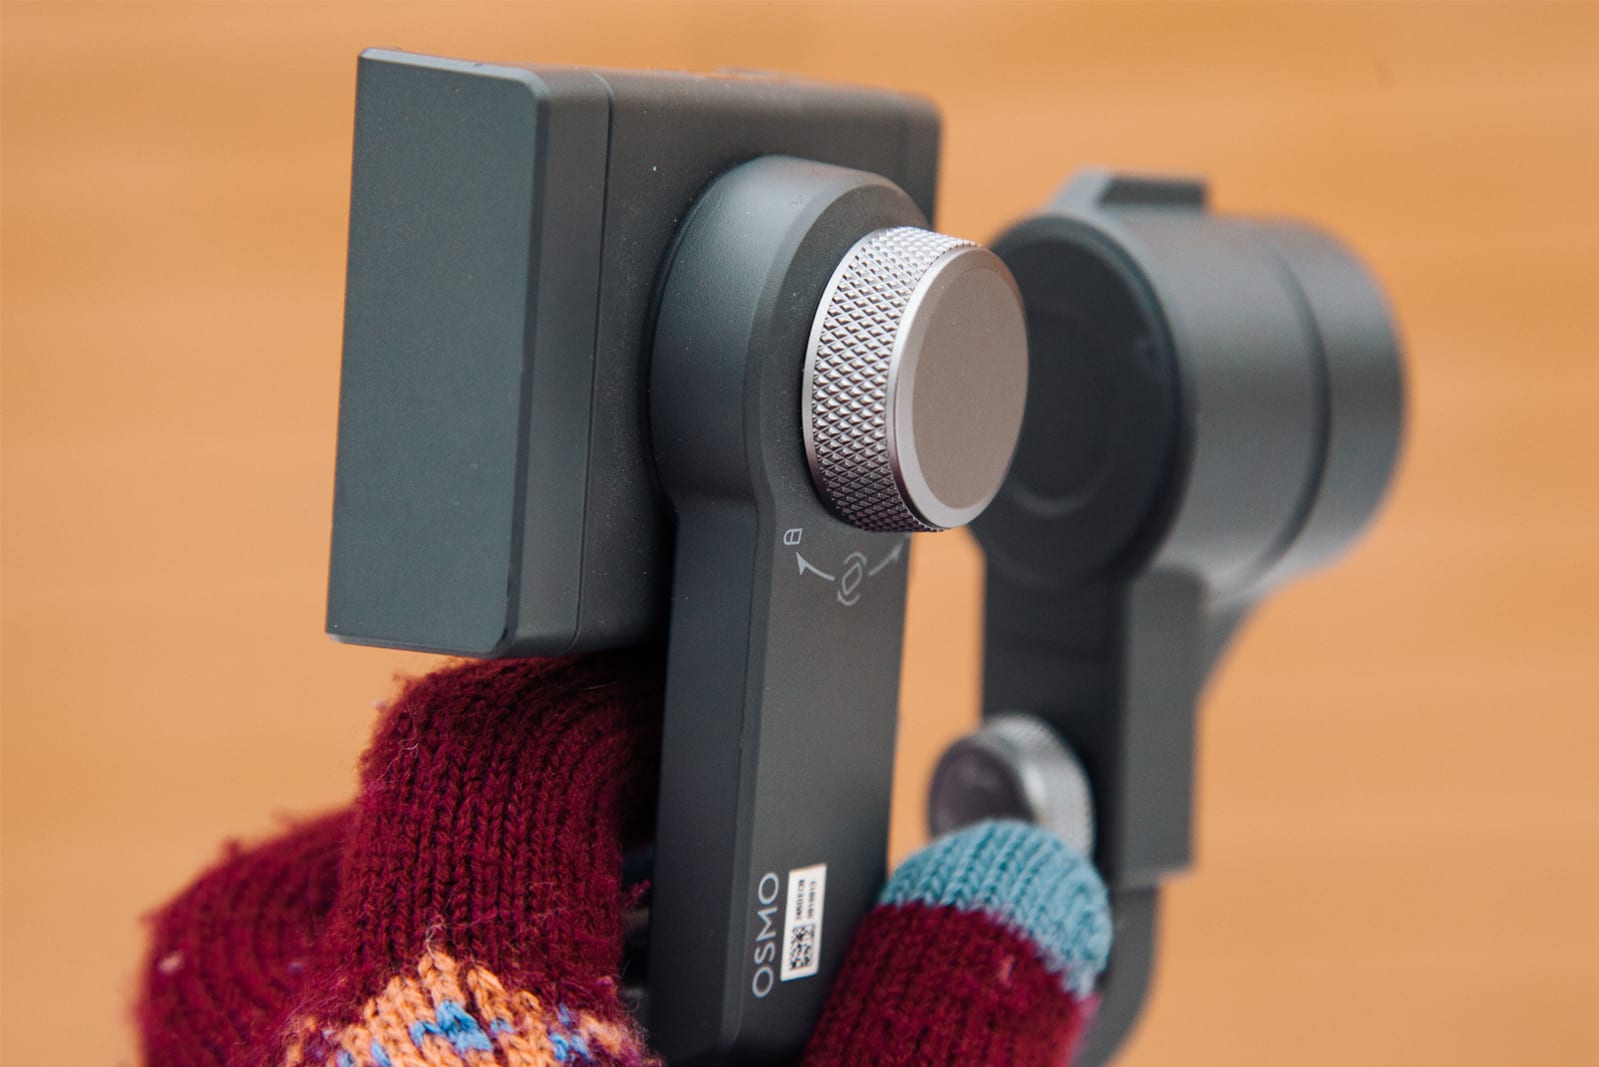 Gimbals for iPhones and Android phones